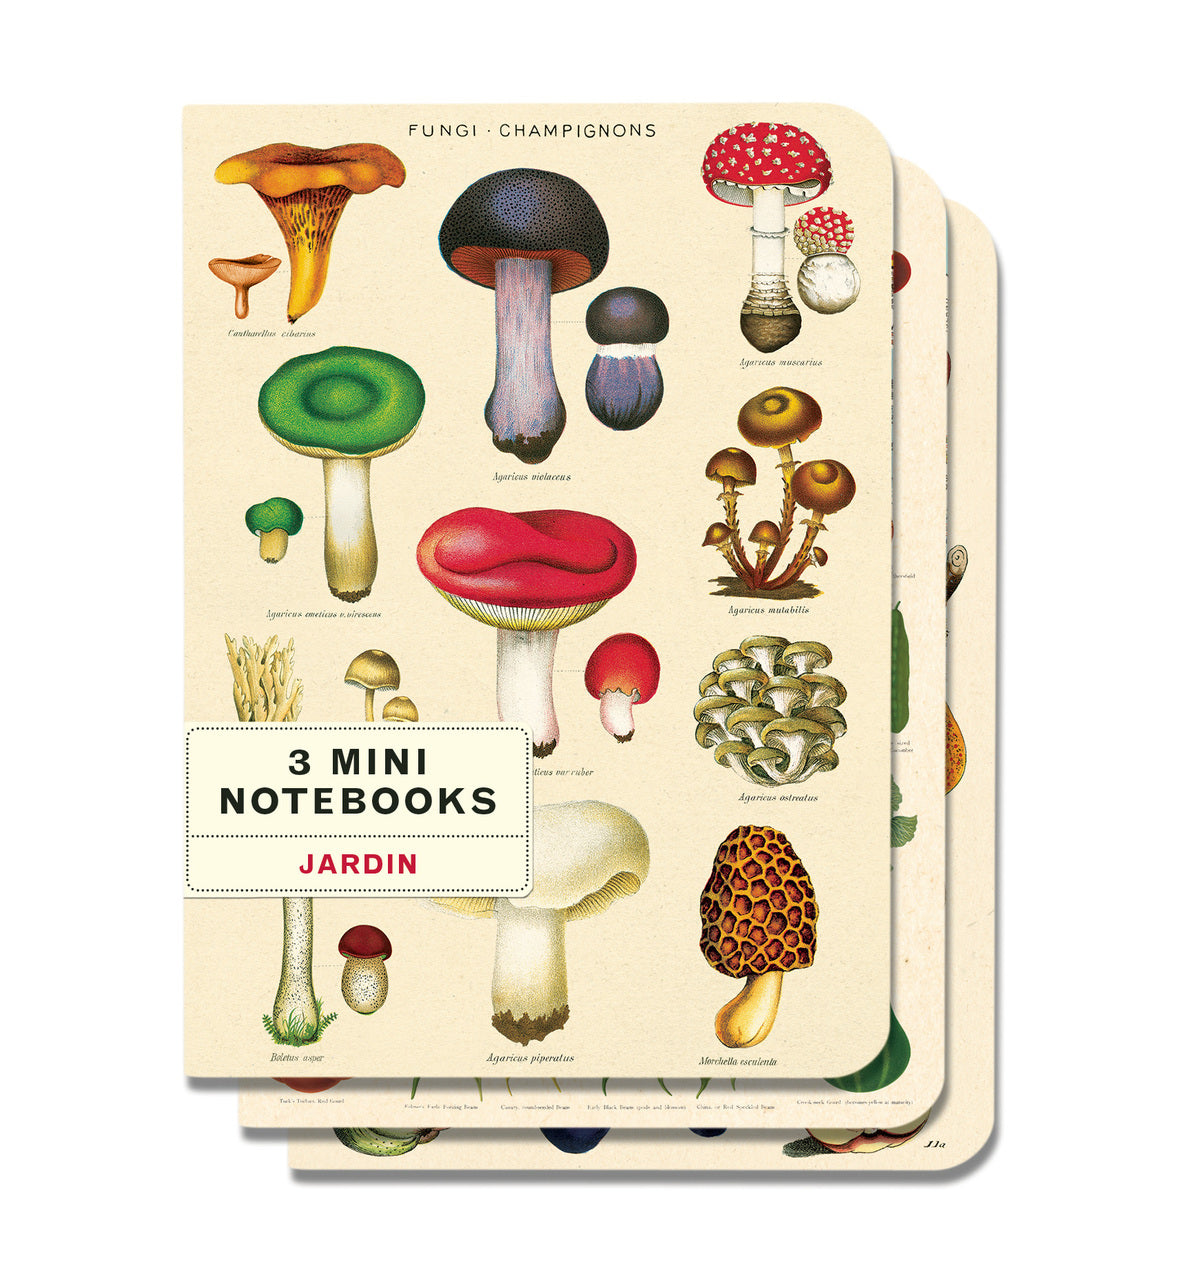 This mini notebook set of three high quality notebooks features bright and colorful reproductions of vintage botanical images to motivate any gardener to get outdoors!